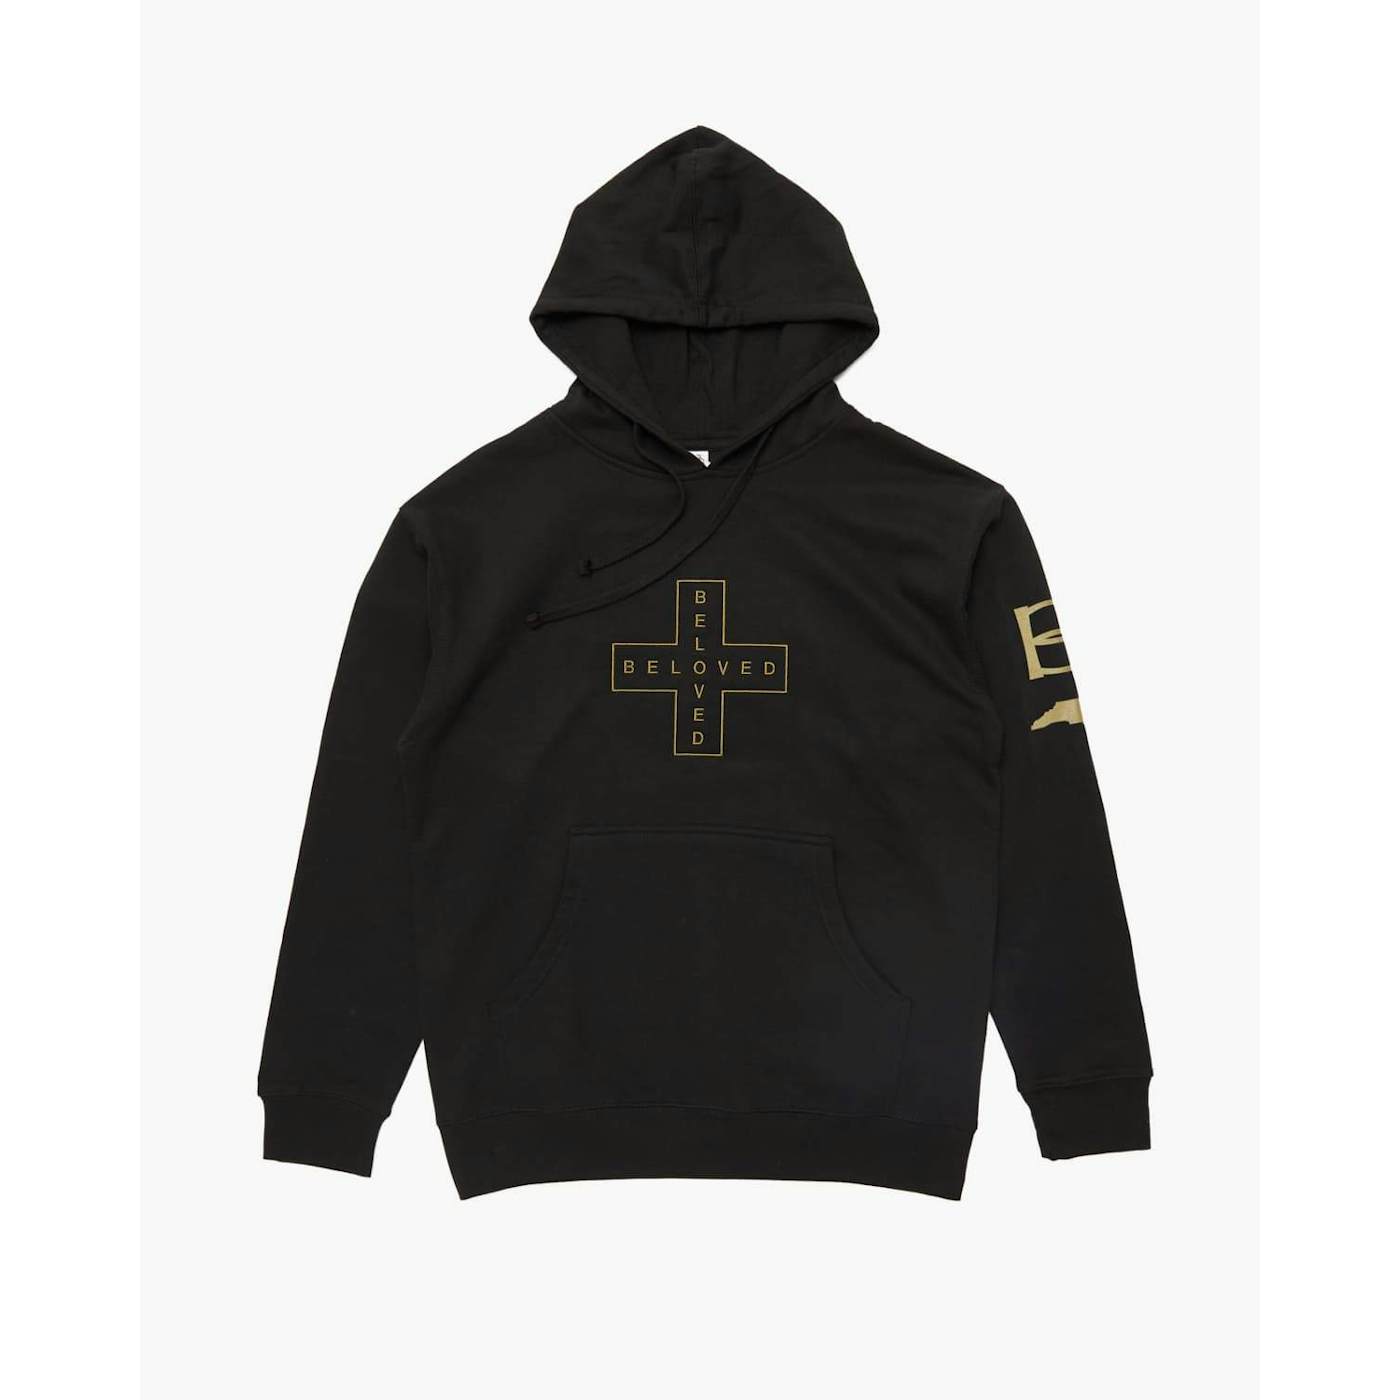 The Beloved 'Cross' Embroidered Pull Over Hoodie - Black